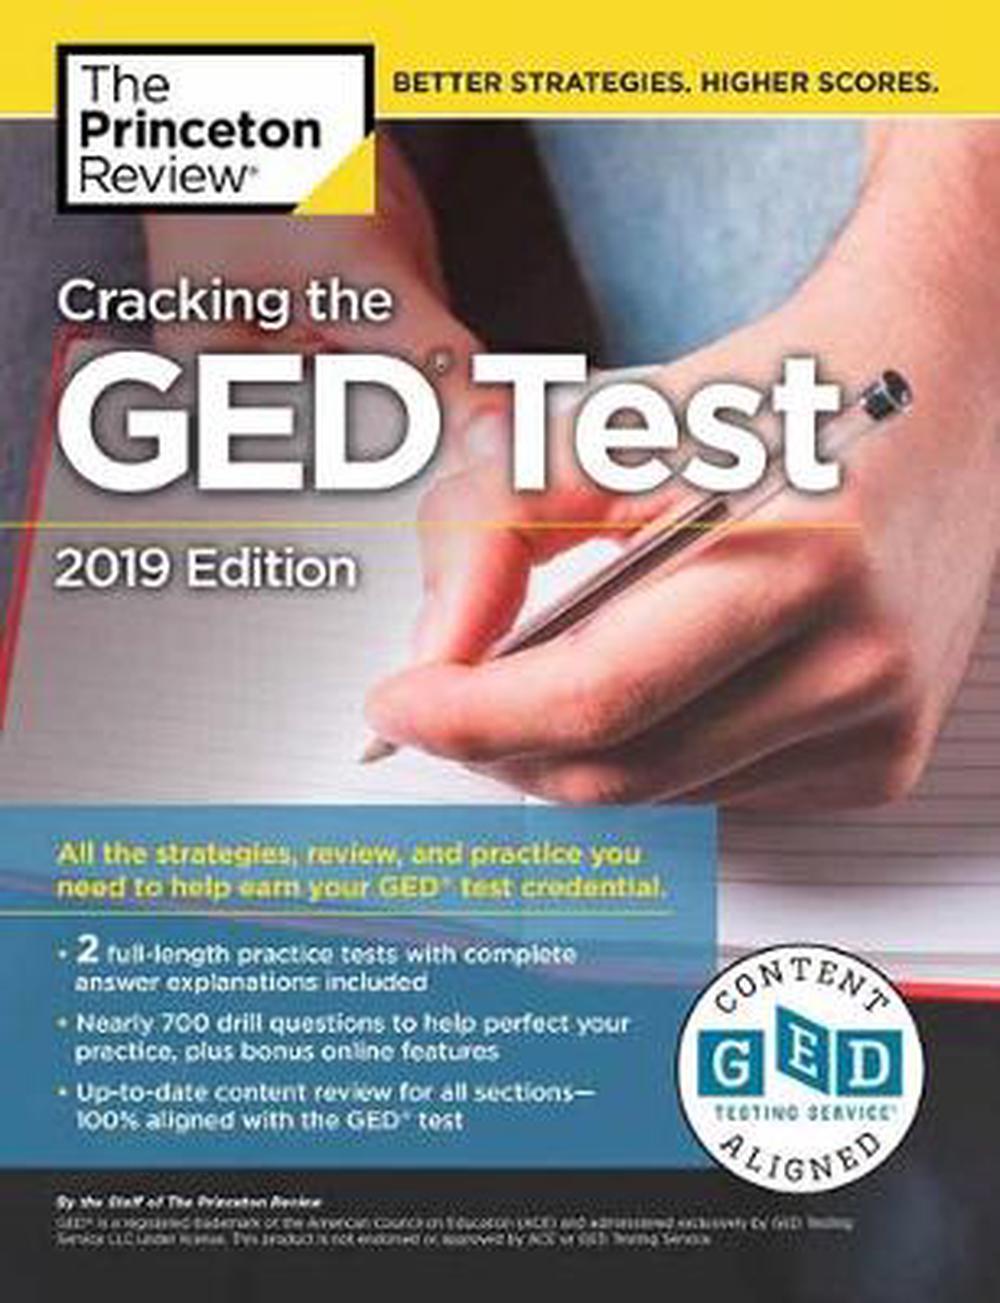 Cracking the Ged Test With 2 Practice Exams by Princeton Review